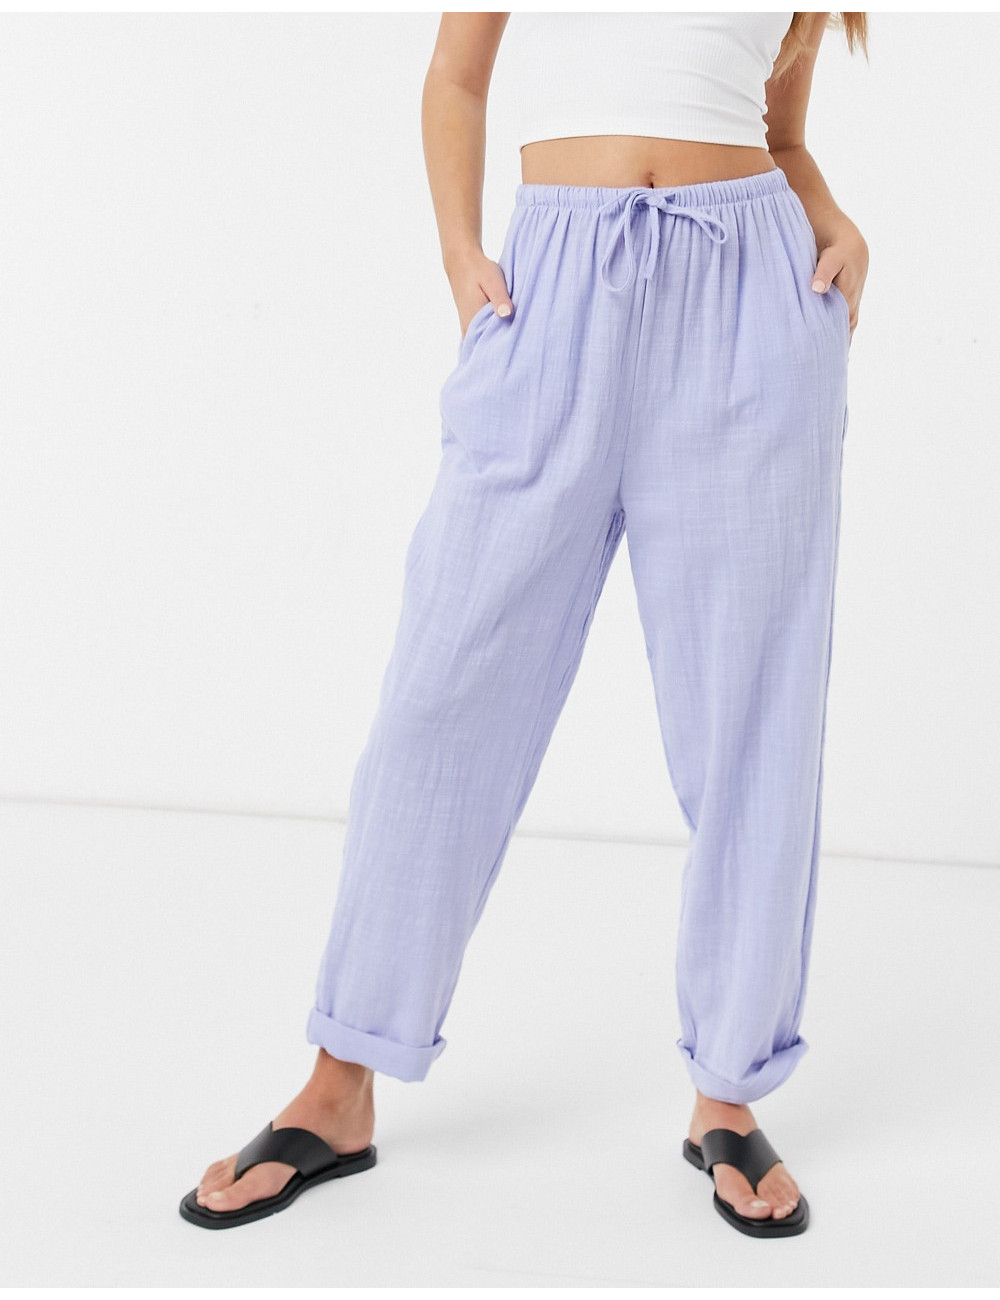 Cotton:On pull on jogger in...